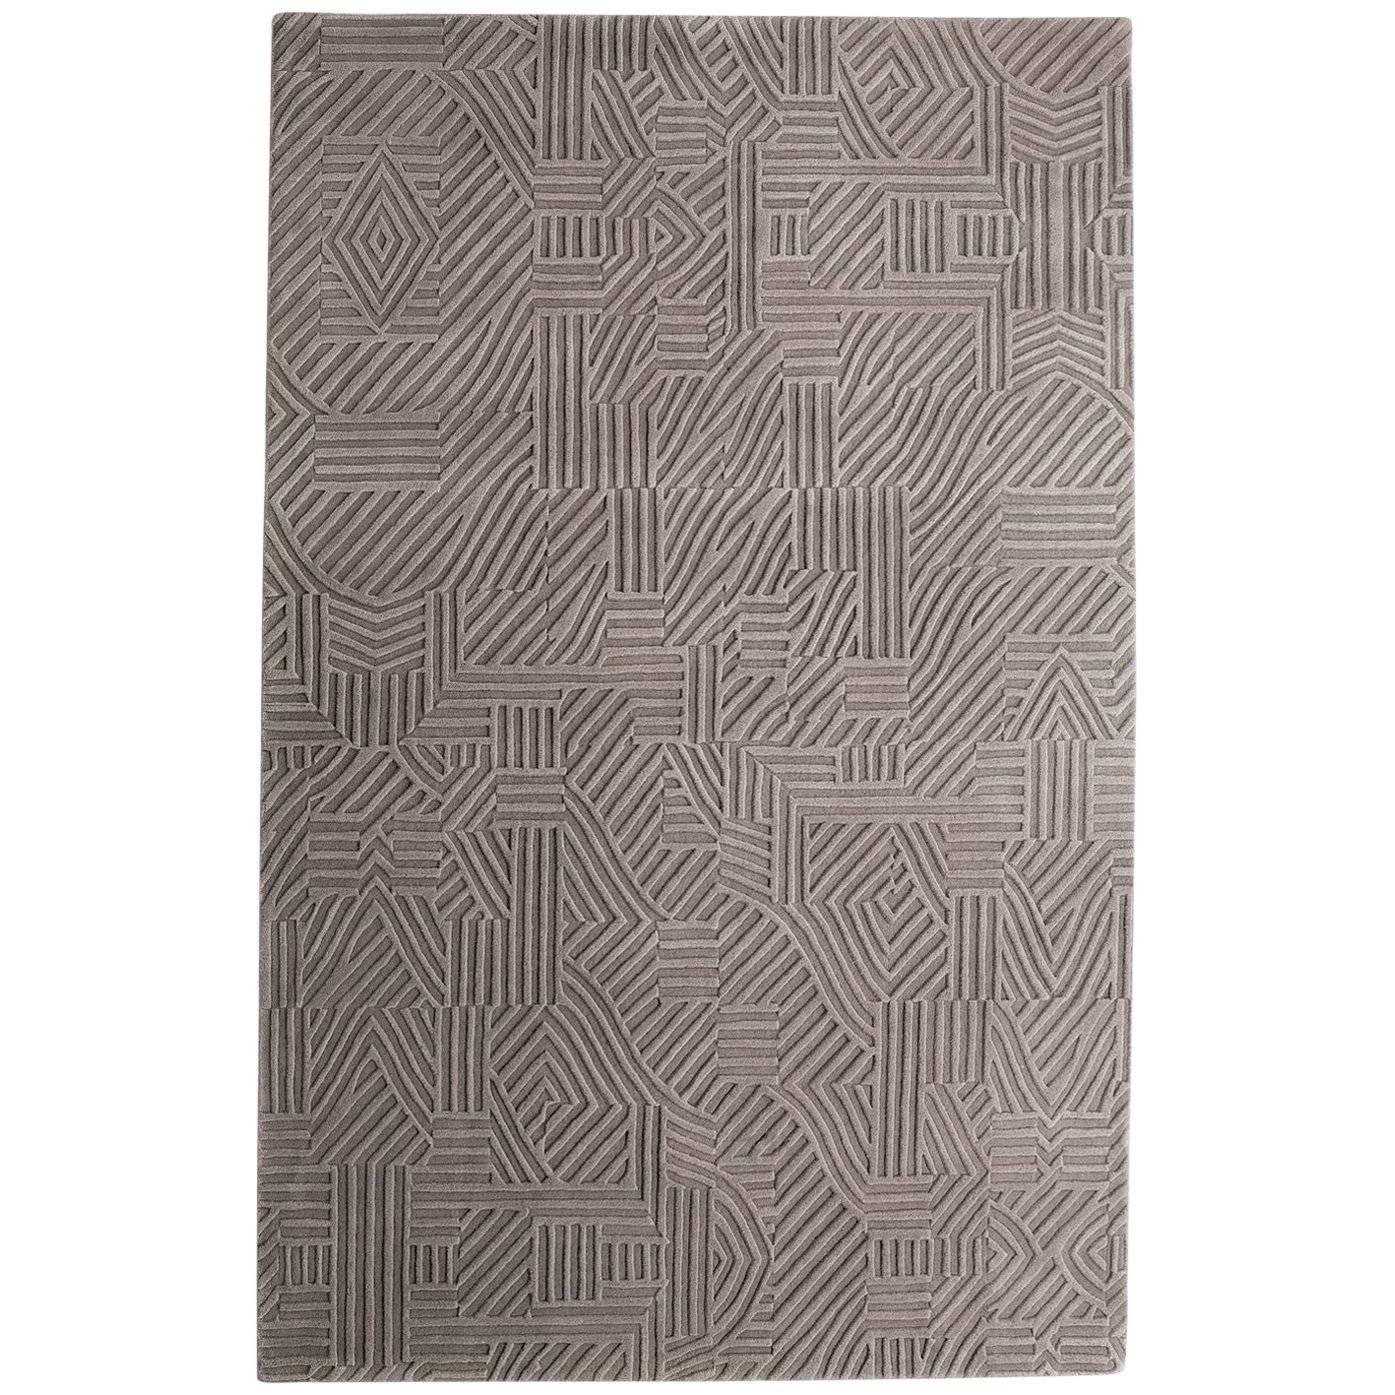 African Pattern 1 Area Rug in Hand-Tufted Wool by Milton Glaser, Small For Sale